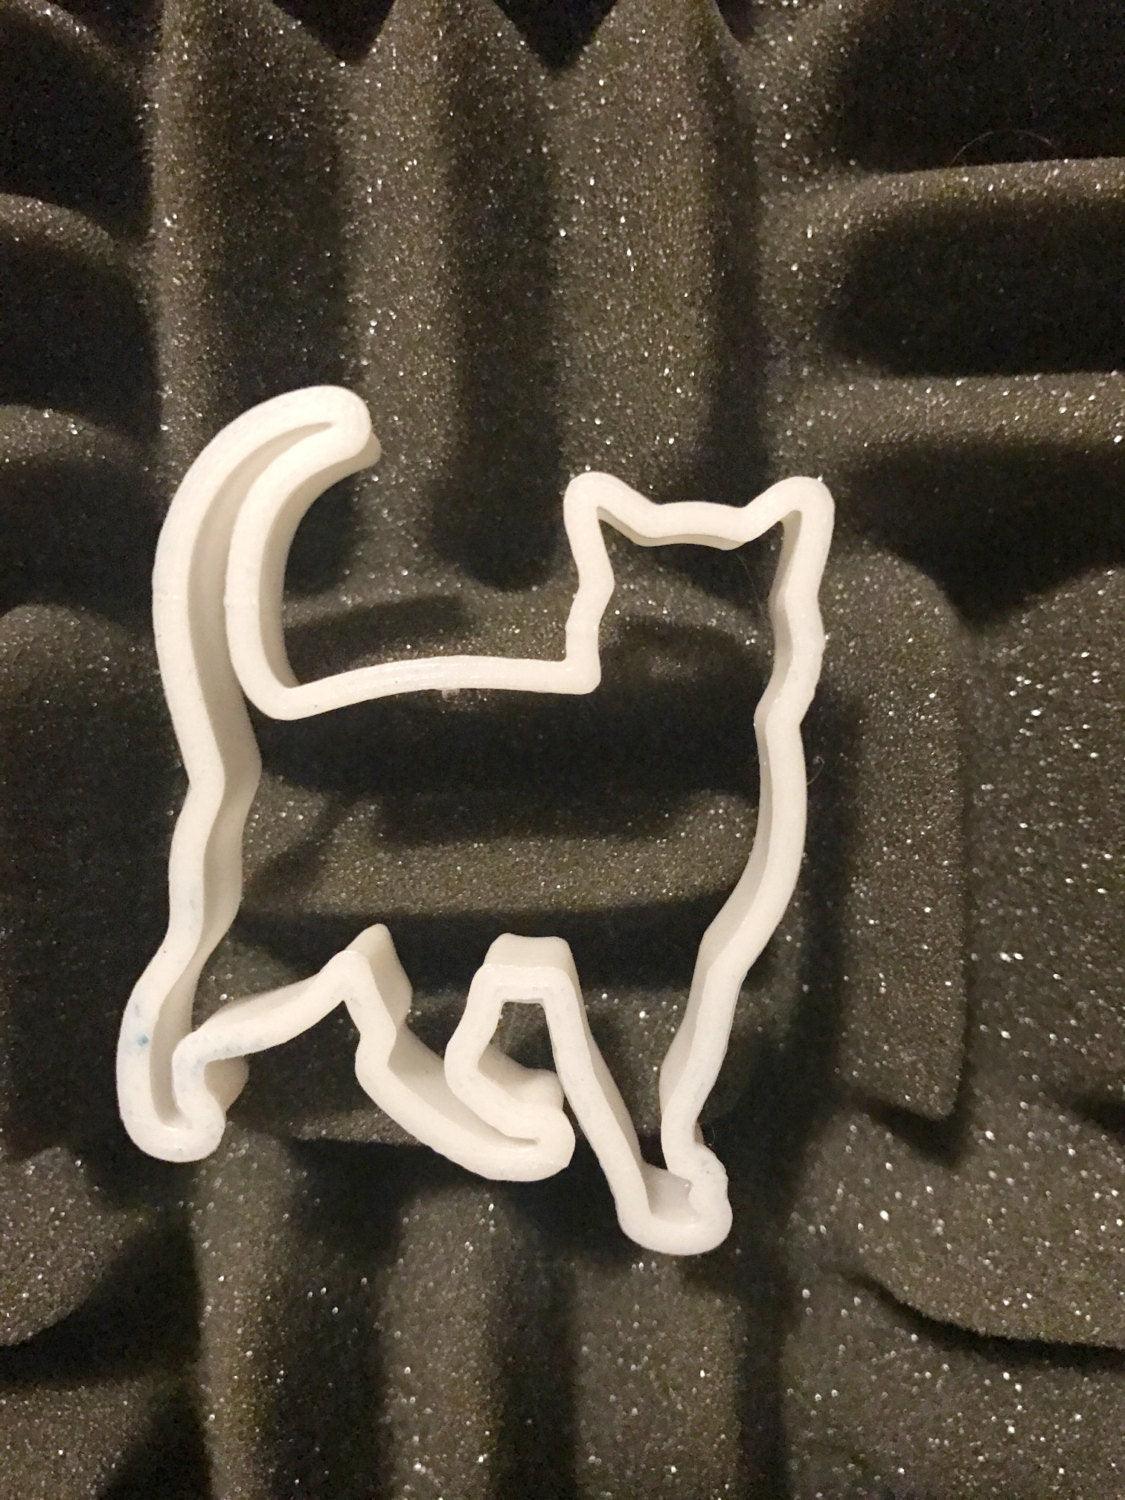 Meow Cat Cookie Cutter, Minimalist, Kitty Cookie Cutter, Kitty, Cat, Meow, Cookie Cutter, Bake, Bakeware, Cookie Cutter - Meow3D